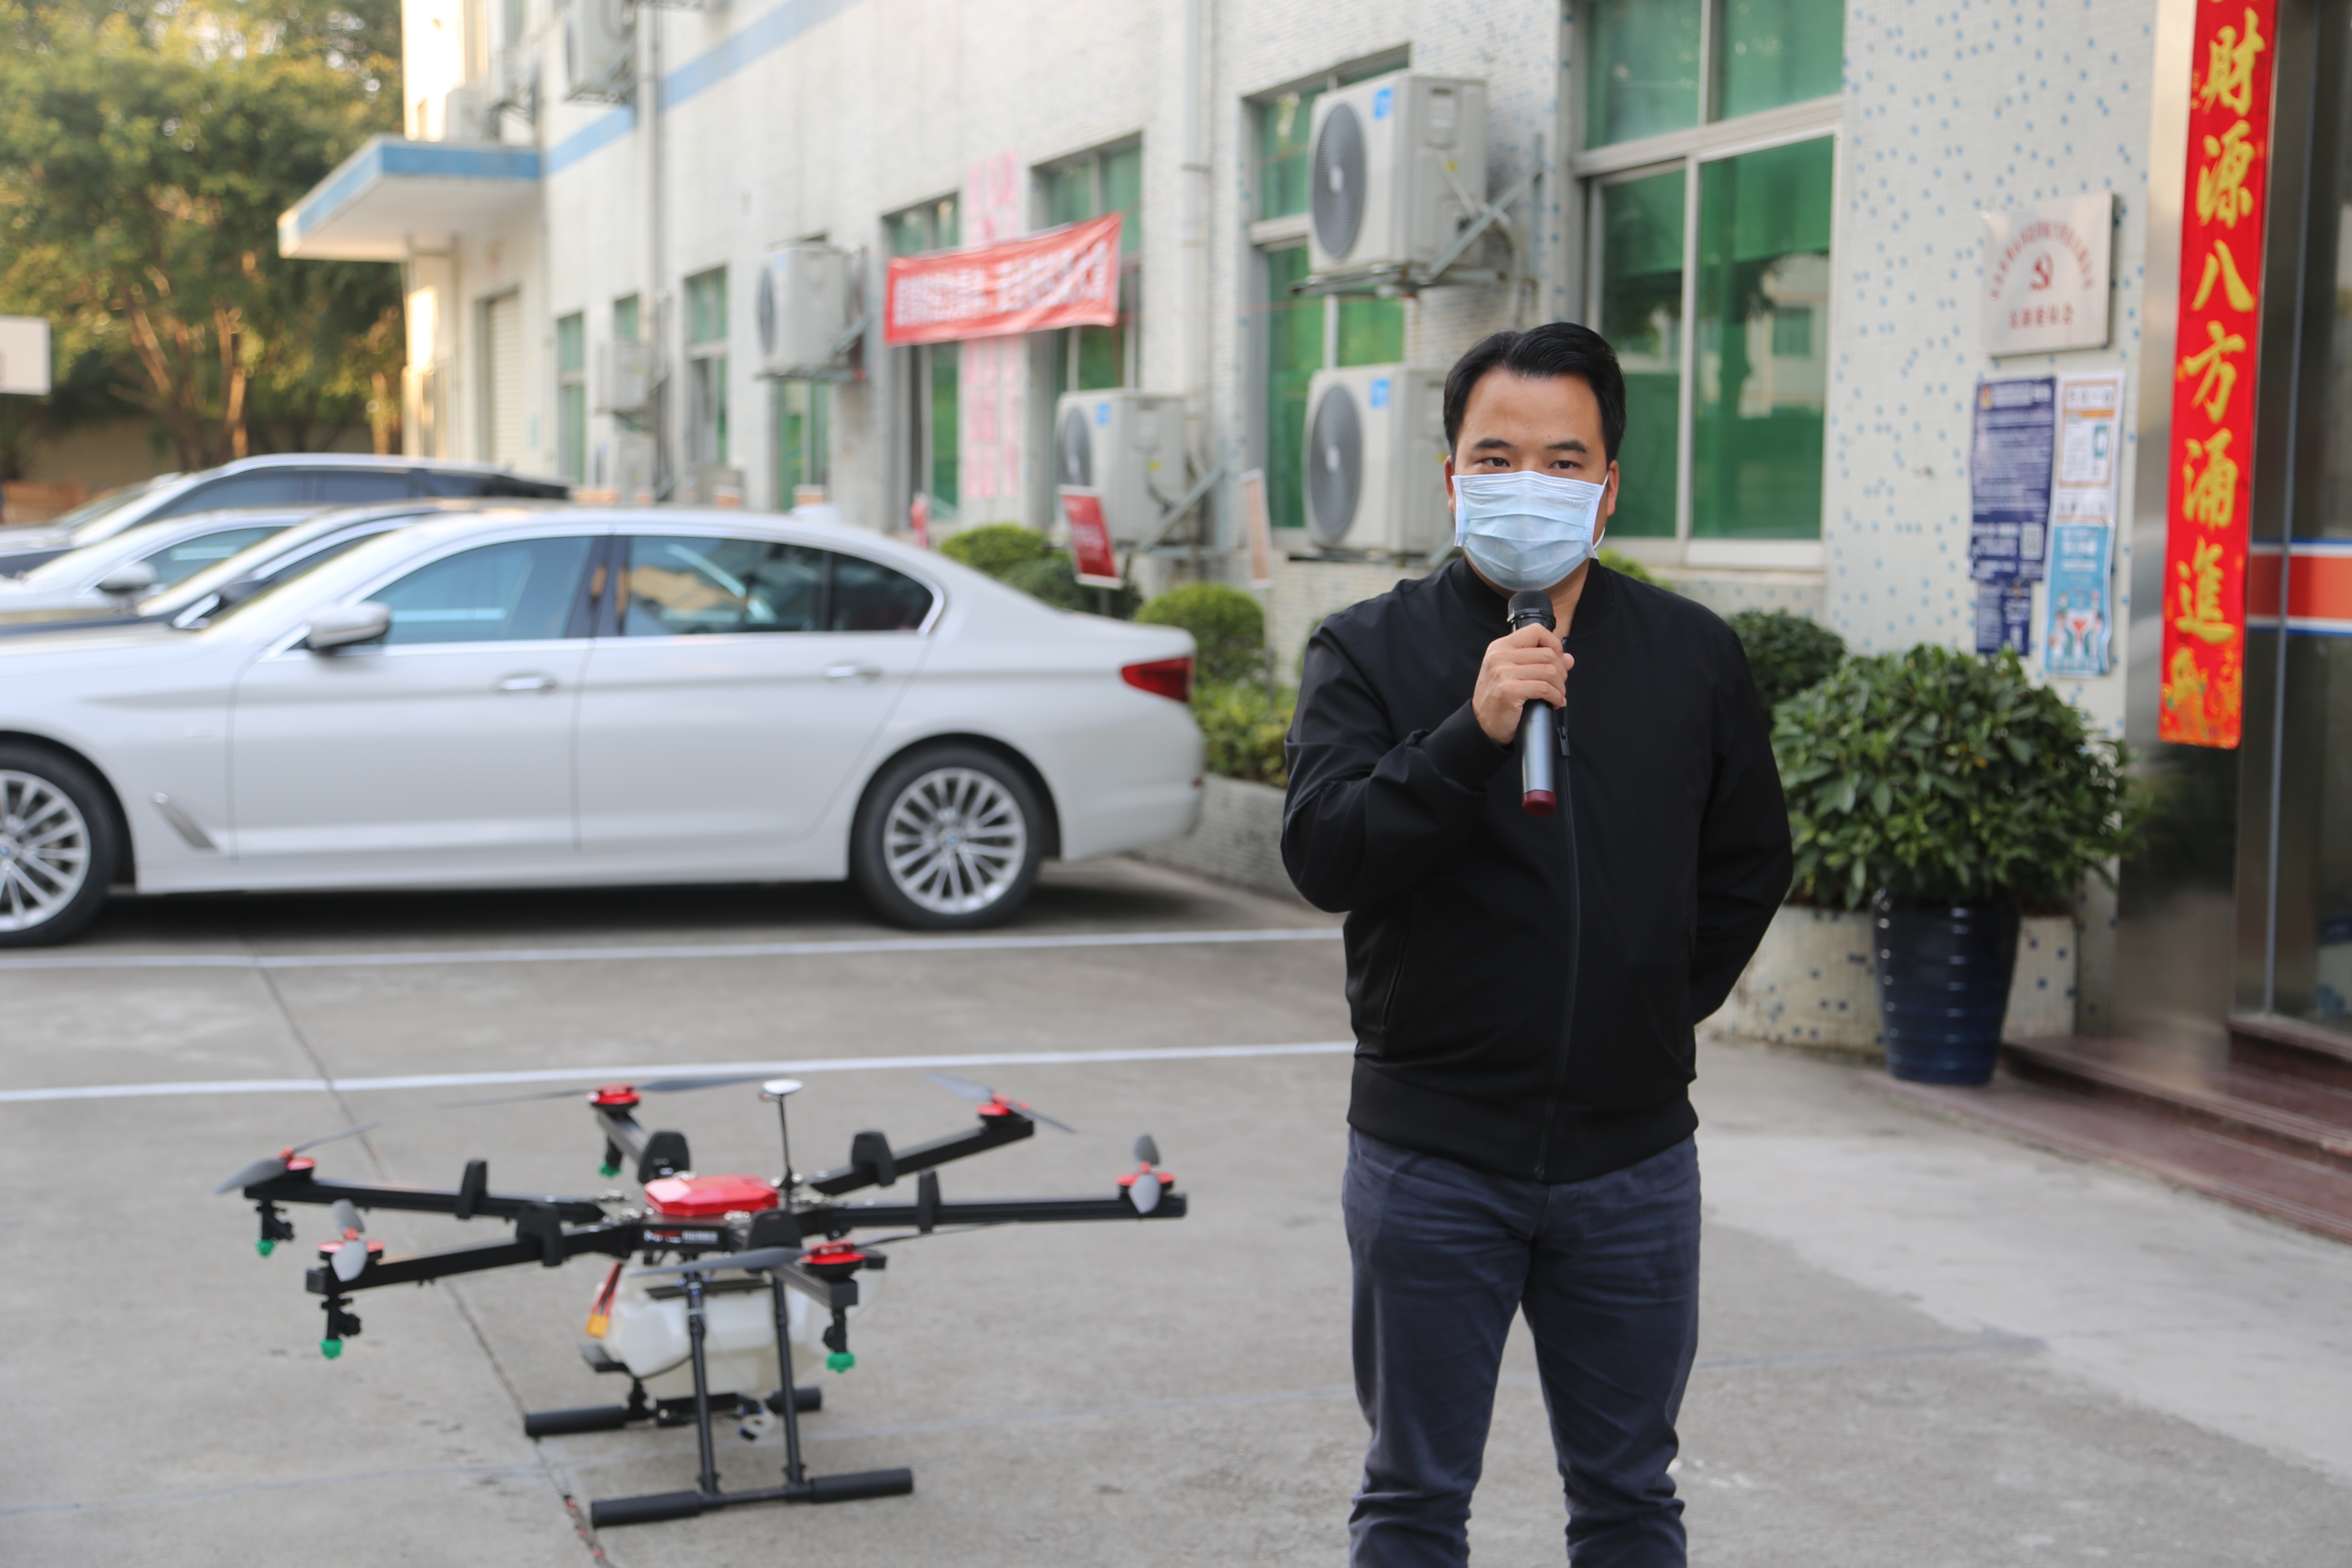 Meet the man behind China’s talking drones: Inside China’s Startups